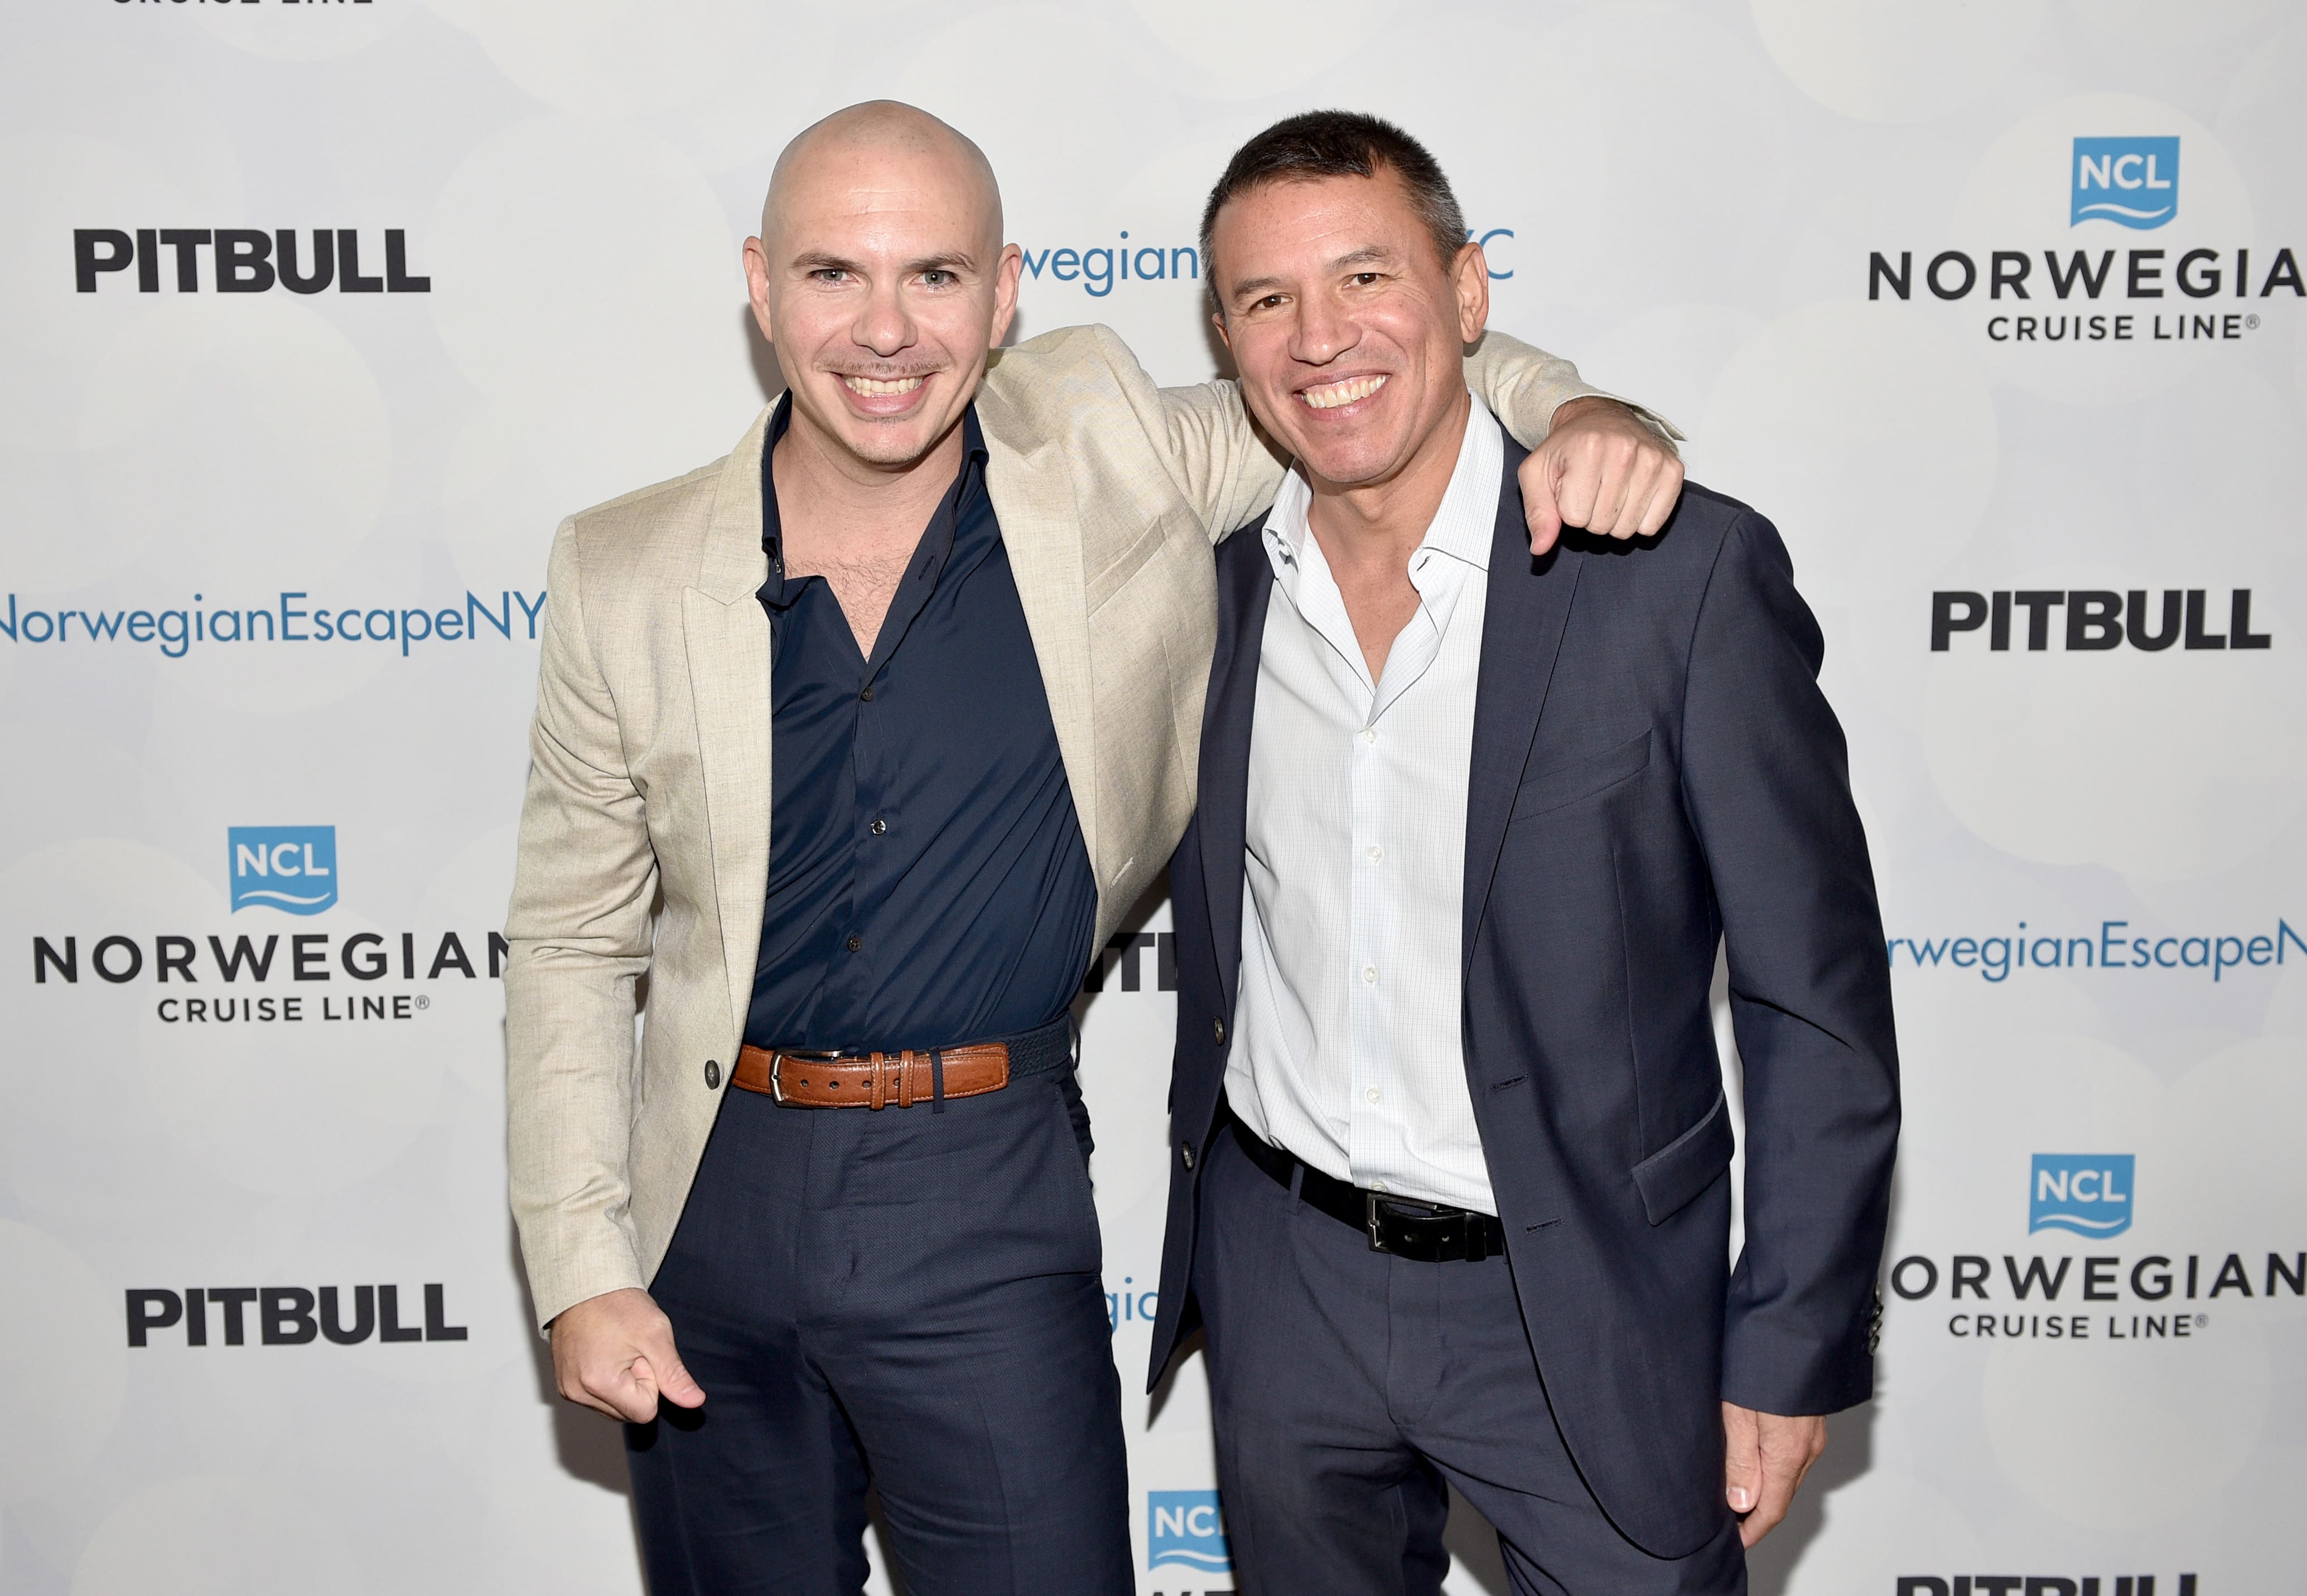 Pitbull with NCL President and CEO Andy Stuart